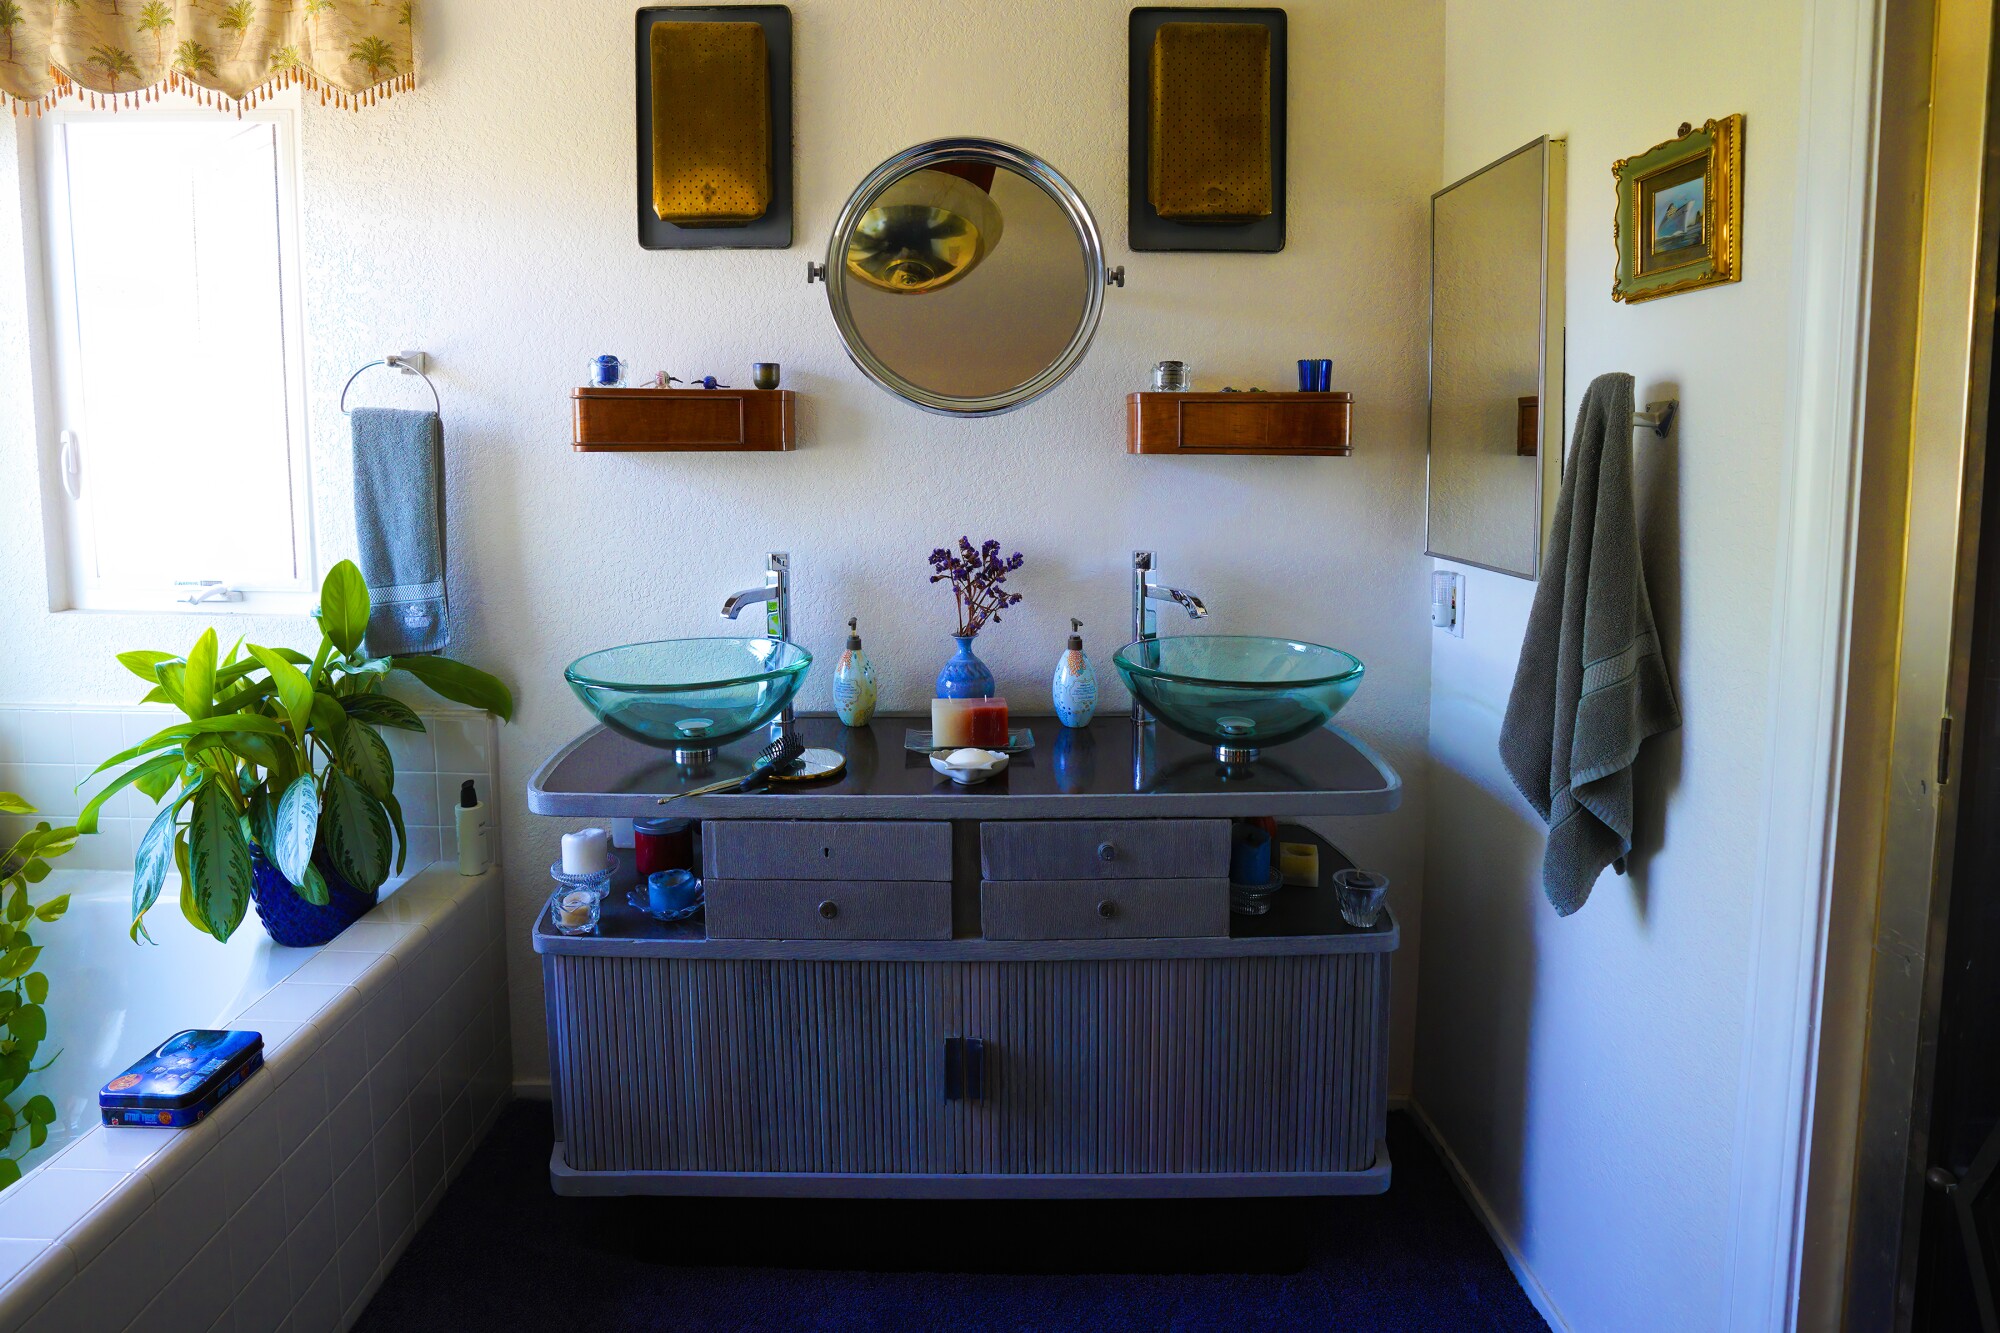 A first class dining room serving station from the 1952 Italian ocean liner Augustus is now a bathroom vanity.